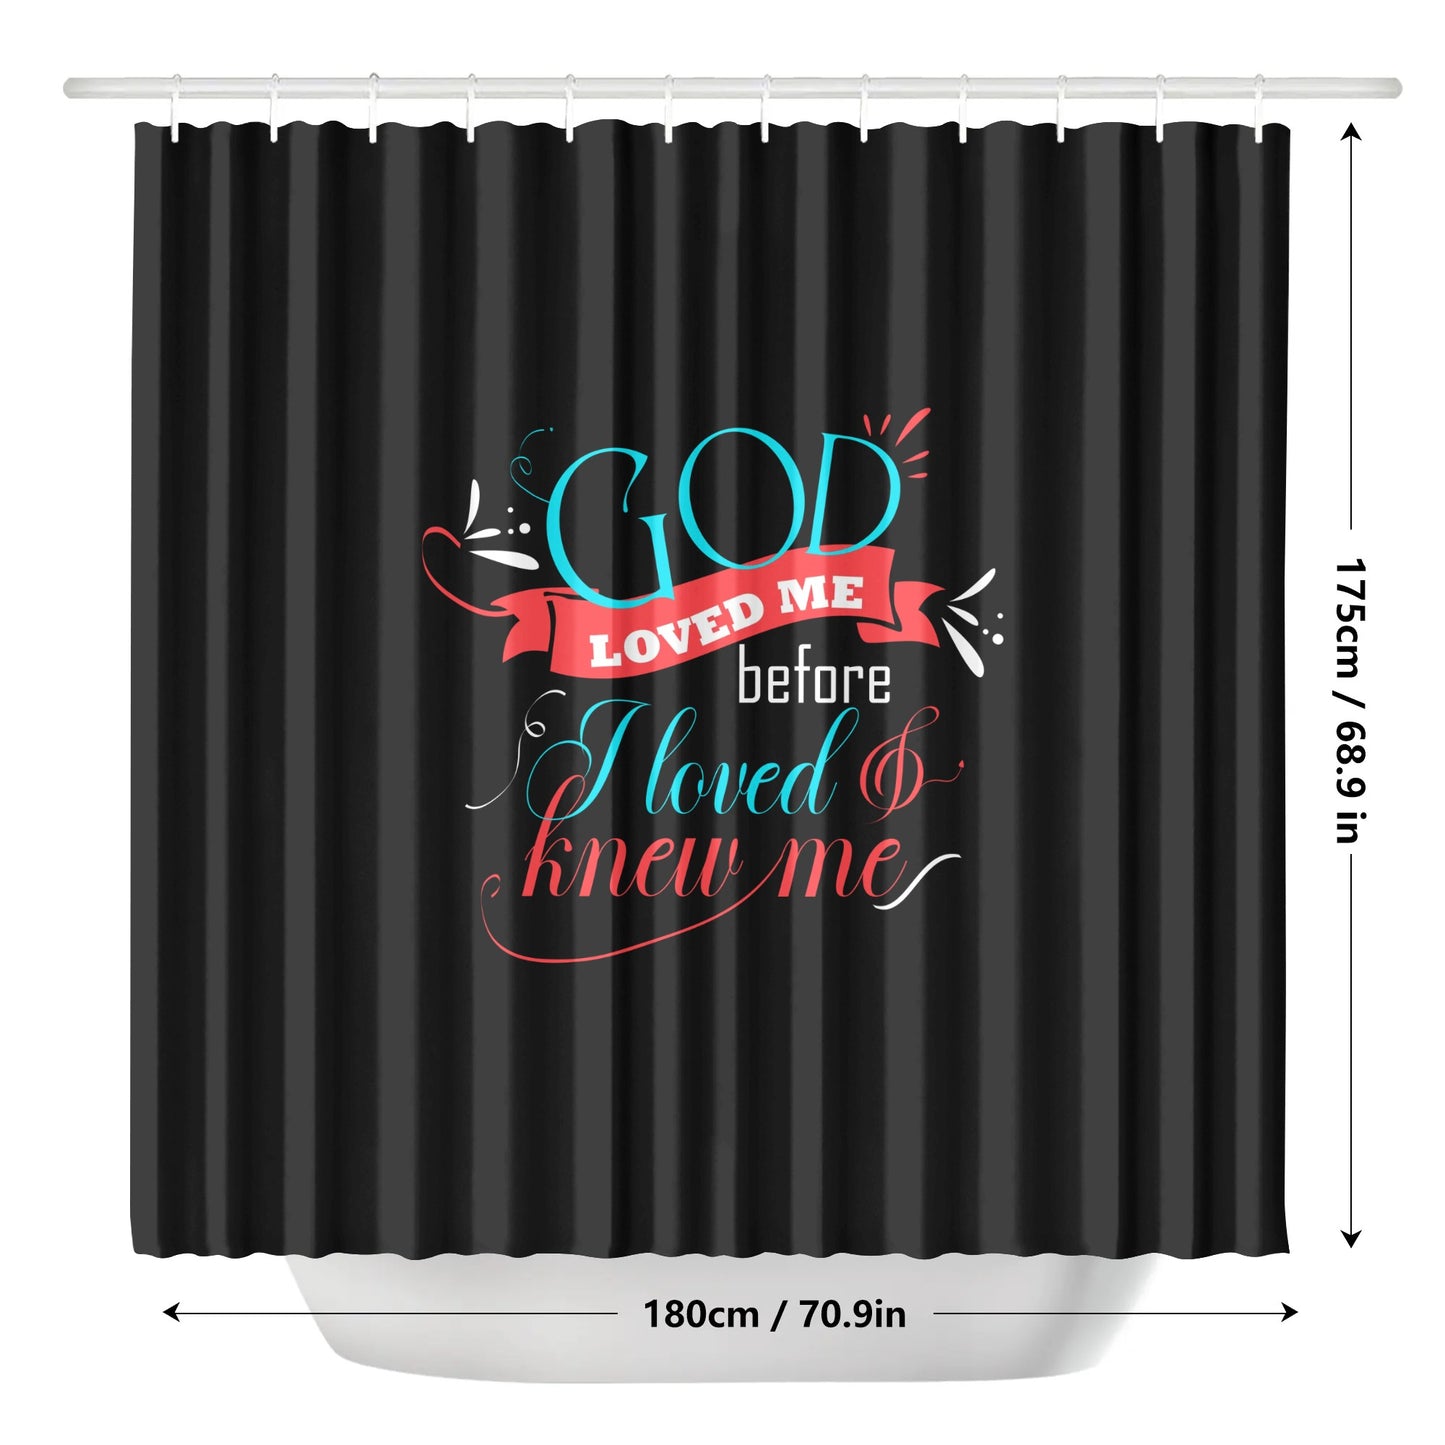 God Loved Me Before I Loved & Knew Me Christian Shower Curtain popcustoms